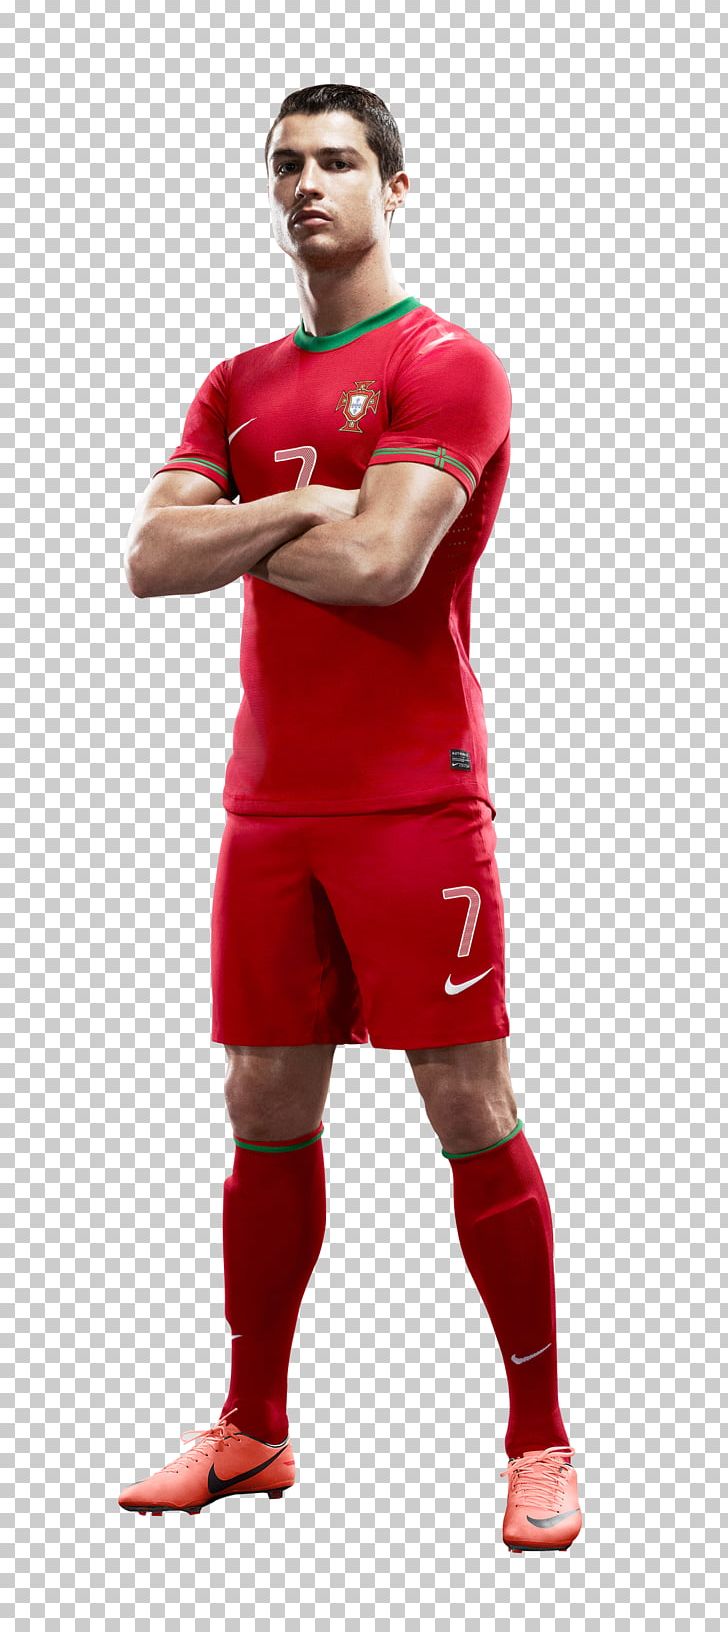 Cristiano Ronaldo Portugal National Football Team Real Madrid C.F. Jersey PNG, Clipart, Abdomen, Arm, Celebrities, Fictional Character, Football Player Free PNG Download